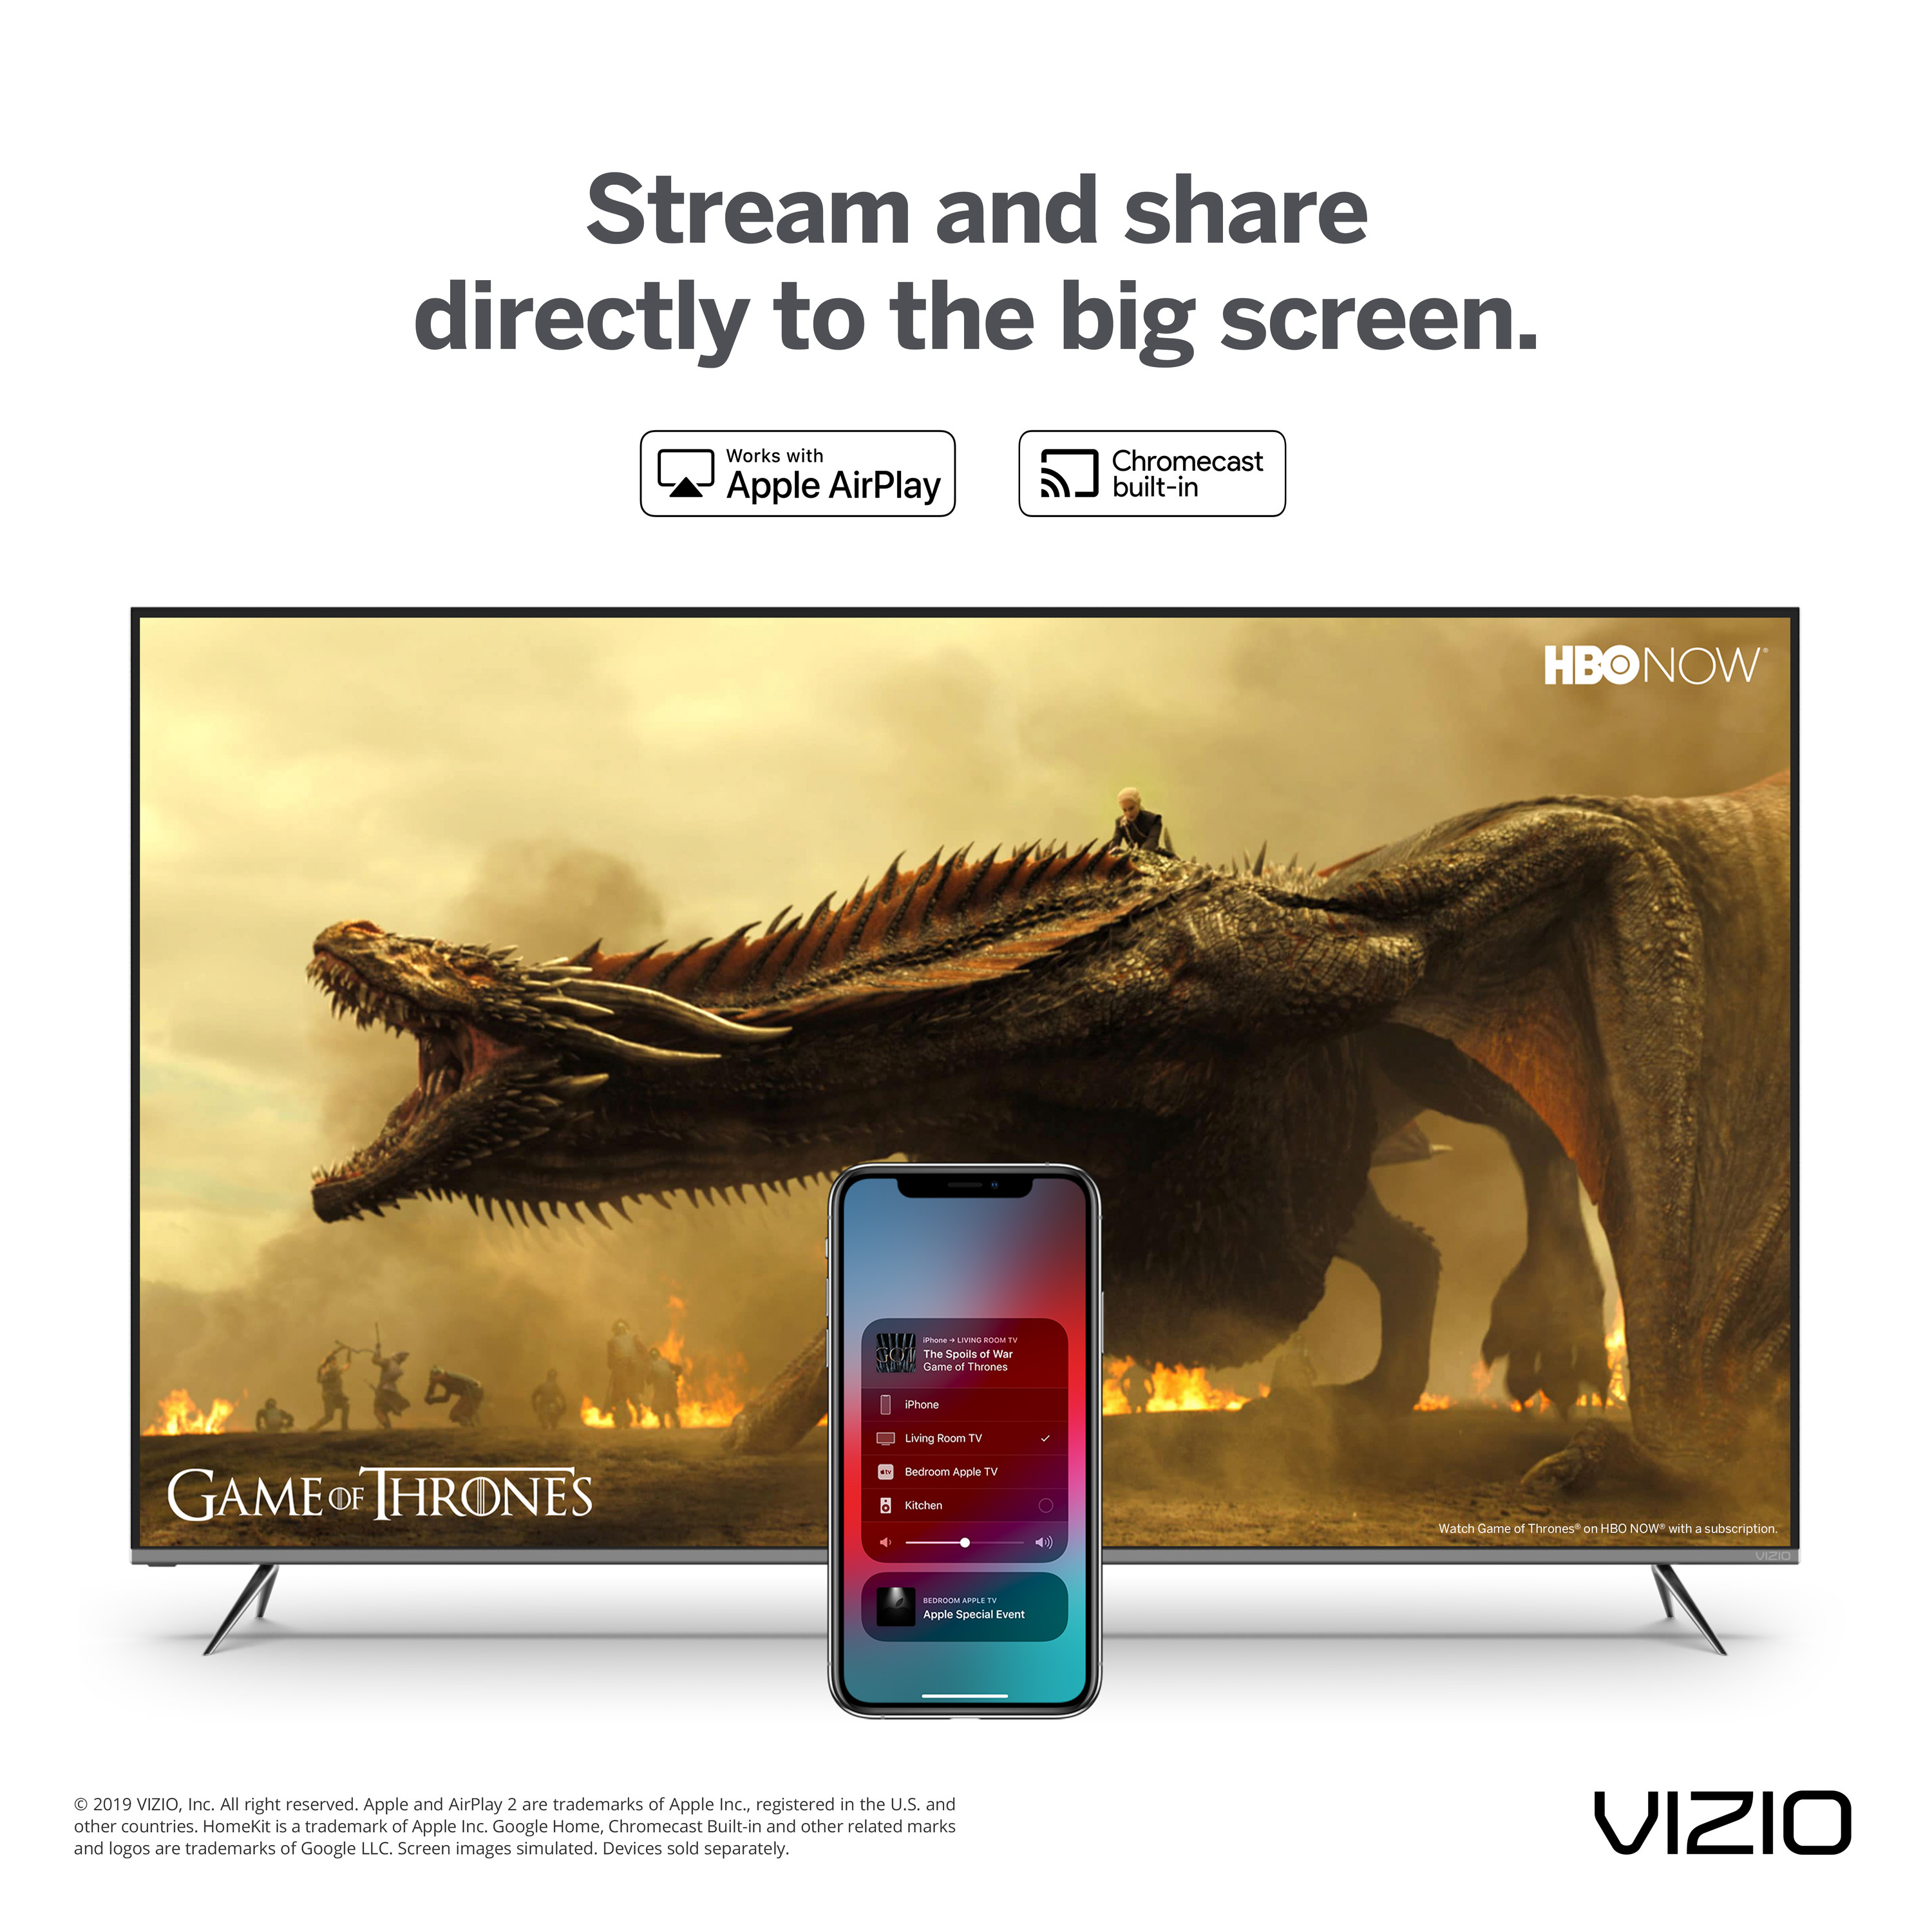 Another black Friday TV deals 2019 is the Vizio 50" Class M Series TV